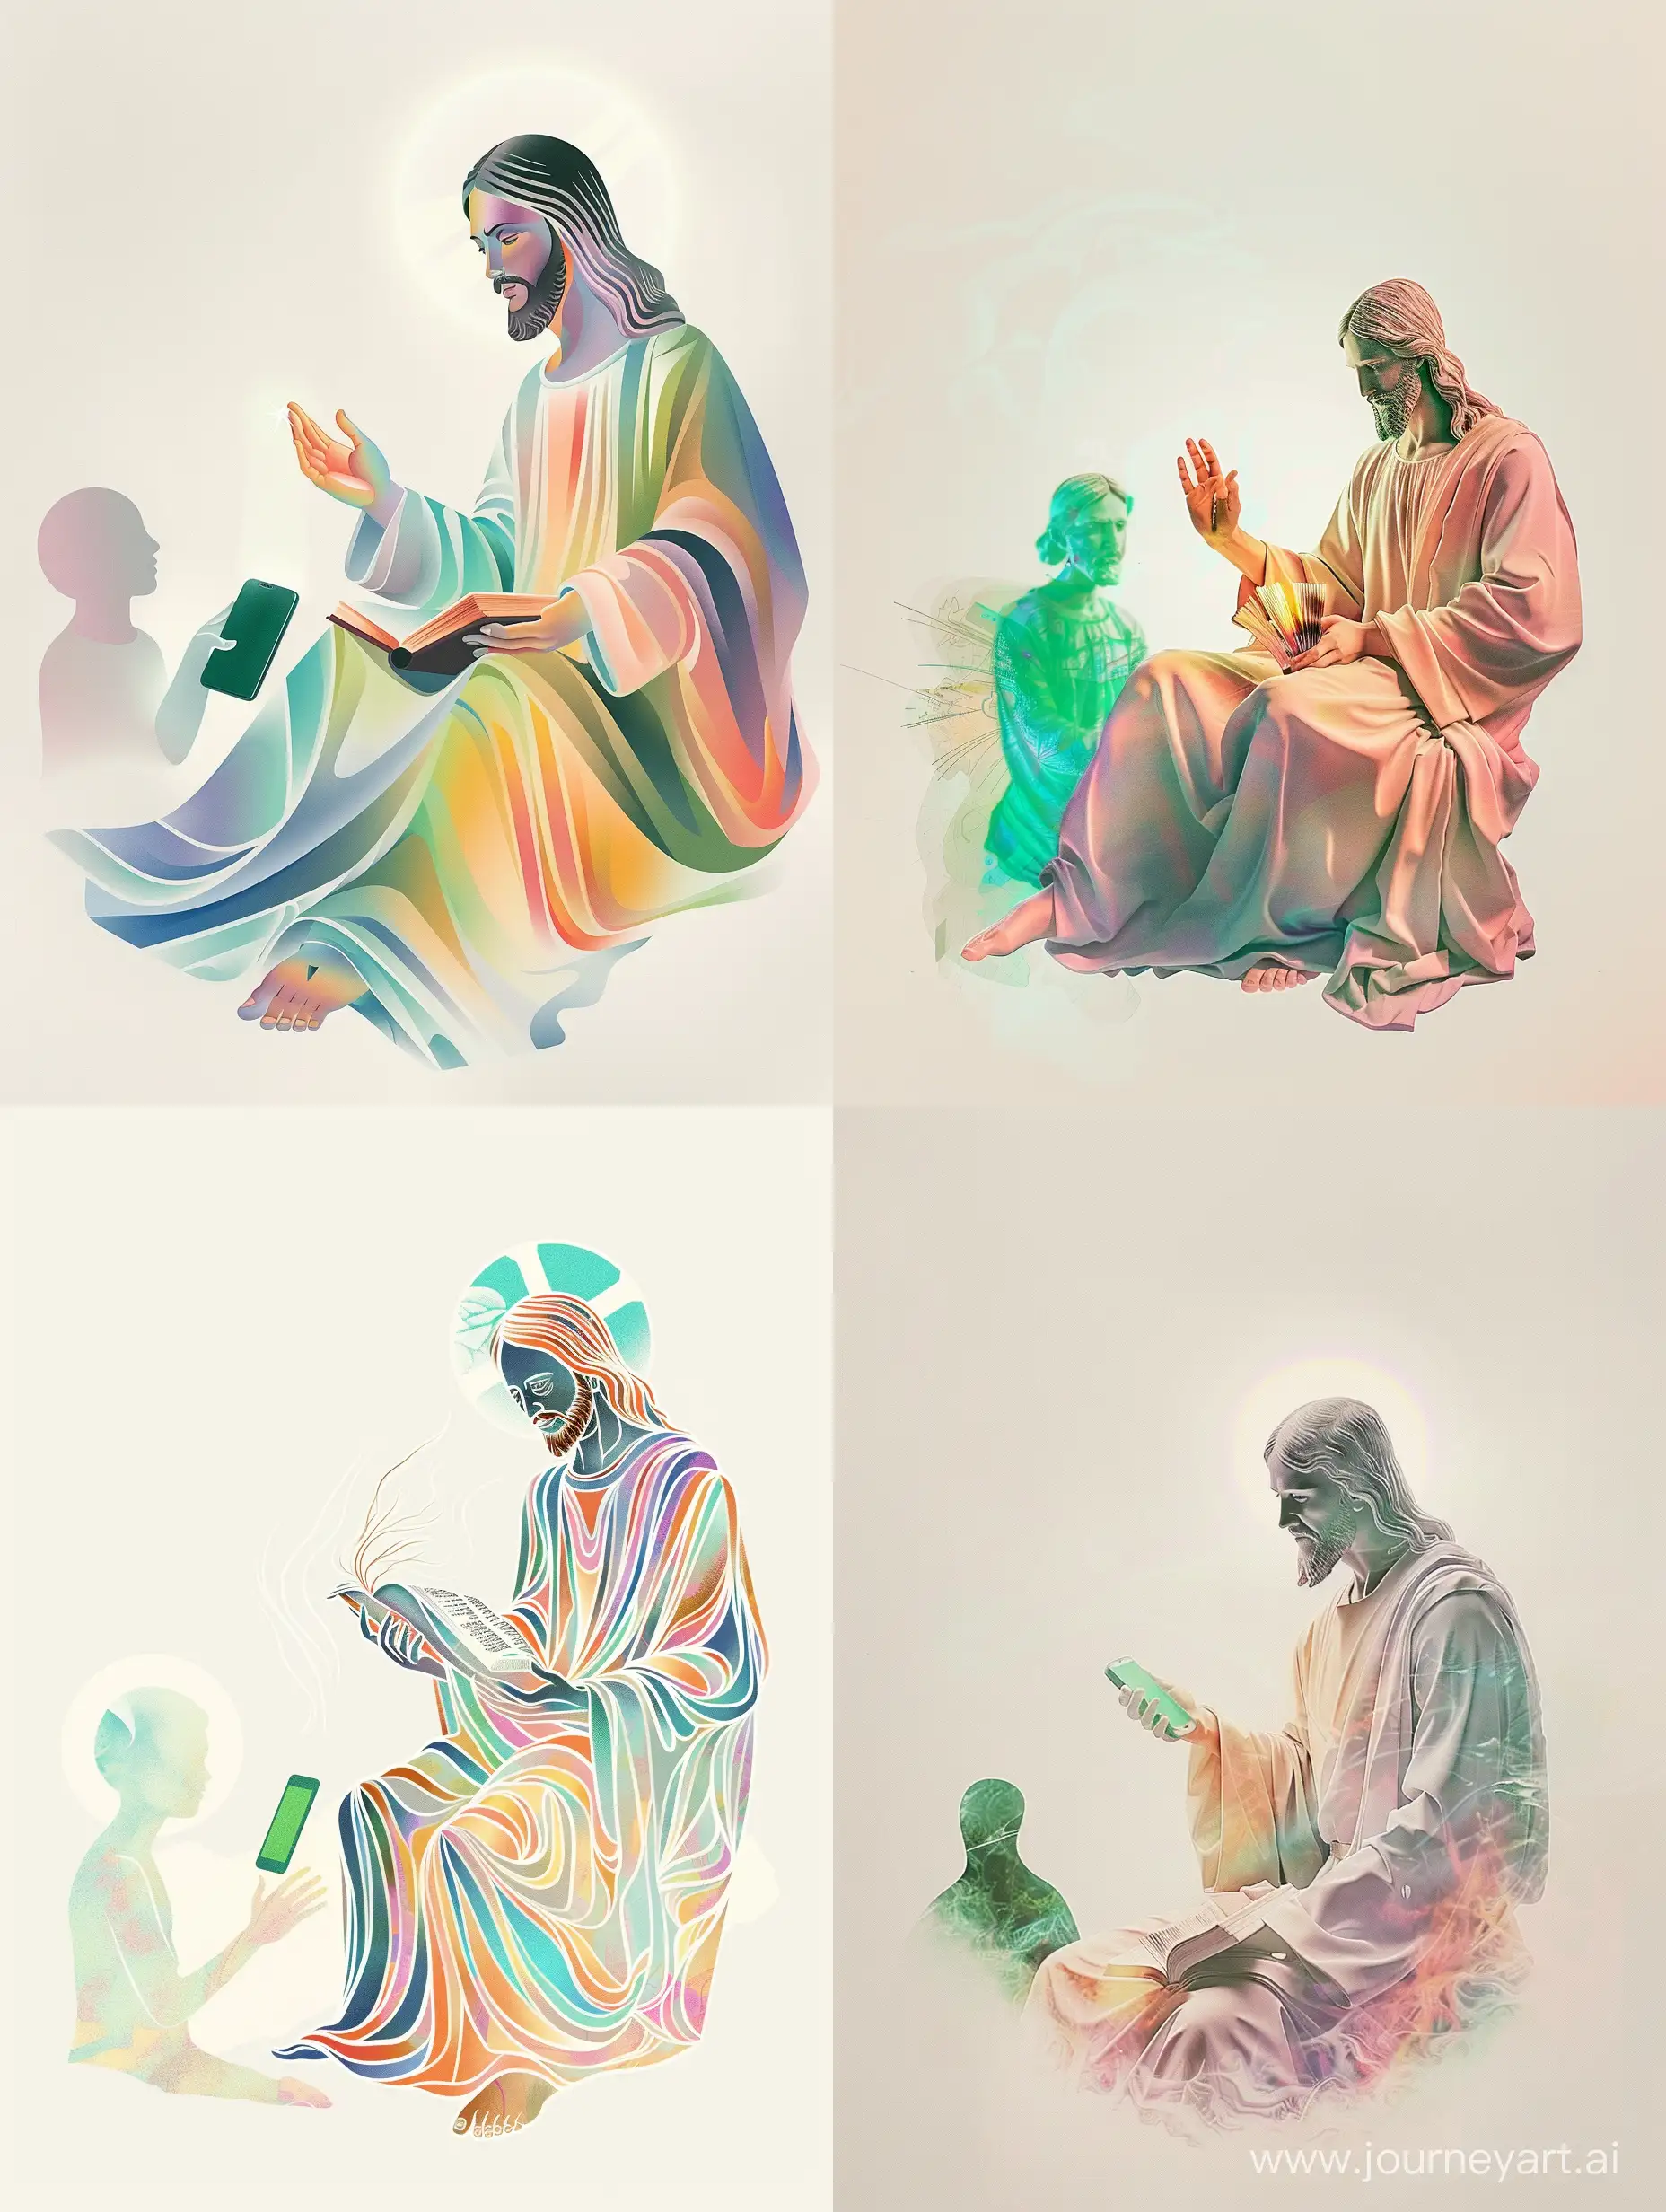 The overall color palette should consist of soft hues with white background and no corners.

Jesus Christ, as the central figure, is placed to the right of the center. Jesus is seated, wearing a simple robe filled with calming colors, with one hand resting on an open book in his lap. The book should be clearly identifiable but subtly incorporated.

His face is gently illuminated, with a soft, warm light creating a subtle halo around his head, giving a sense of divinity. The face should be peaceful and inviting, with a kind gaze directed towards the left side of the image, but still clearly visible and identifiable.

On the left, closer to the edge of the image, is a smaller, abstract figure representing a person. This figure is simple and non-detailed, it could be depicted in mid-motion, reaching out towards the figure of Jesus, indicating a sense of seeking or reaching out for help.

The two figures are separated by a subtle gradient of light, originating from the figure of Jesus, hinting at a transfer of wisdom or healing energy from Jesus to the person. In between them lays a green smartphone.

In essence, the image is a modern, stylized representation of Jesus Christ as a therapist, interacting with a person seeking help, set against a serene, calming background.